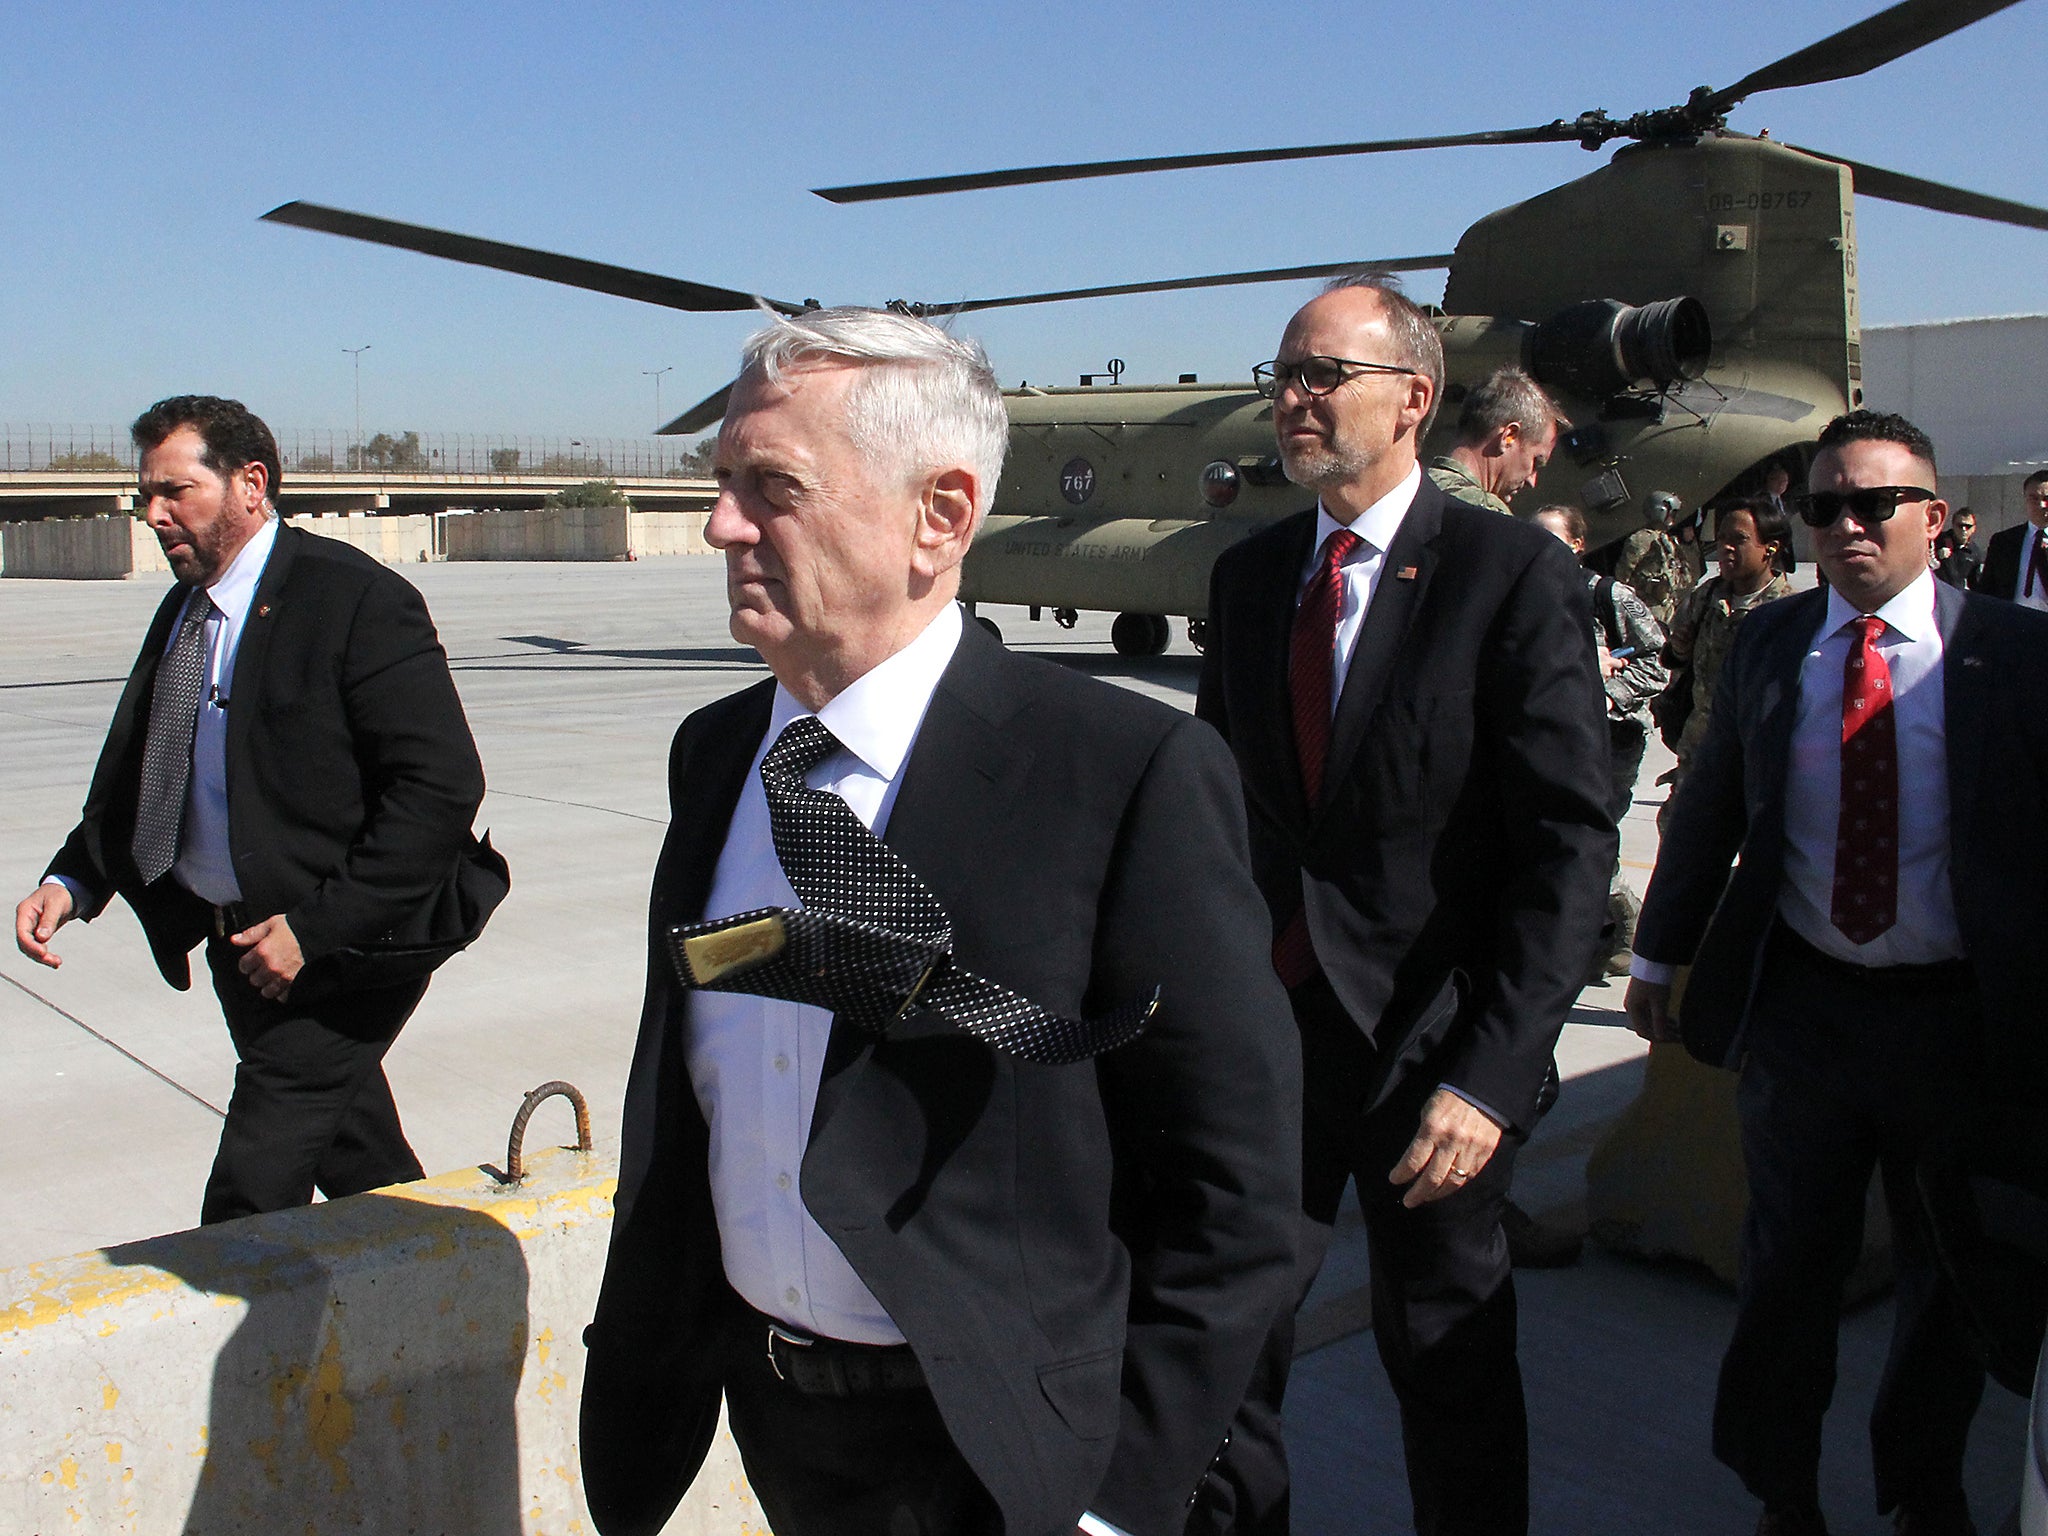 It is not the first time James Mattis has disagreed with his Commander-in-Chief